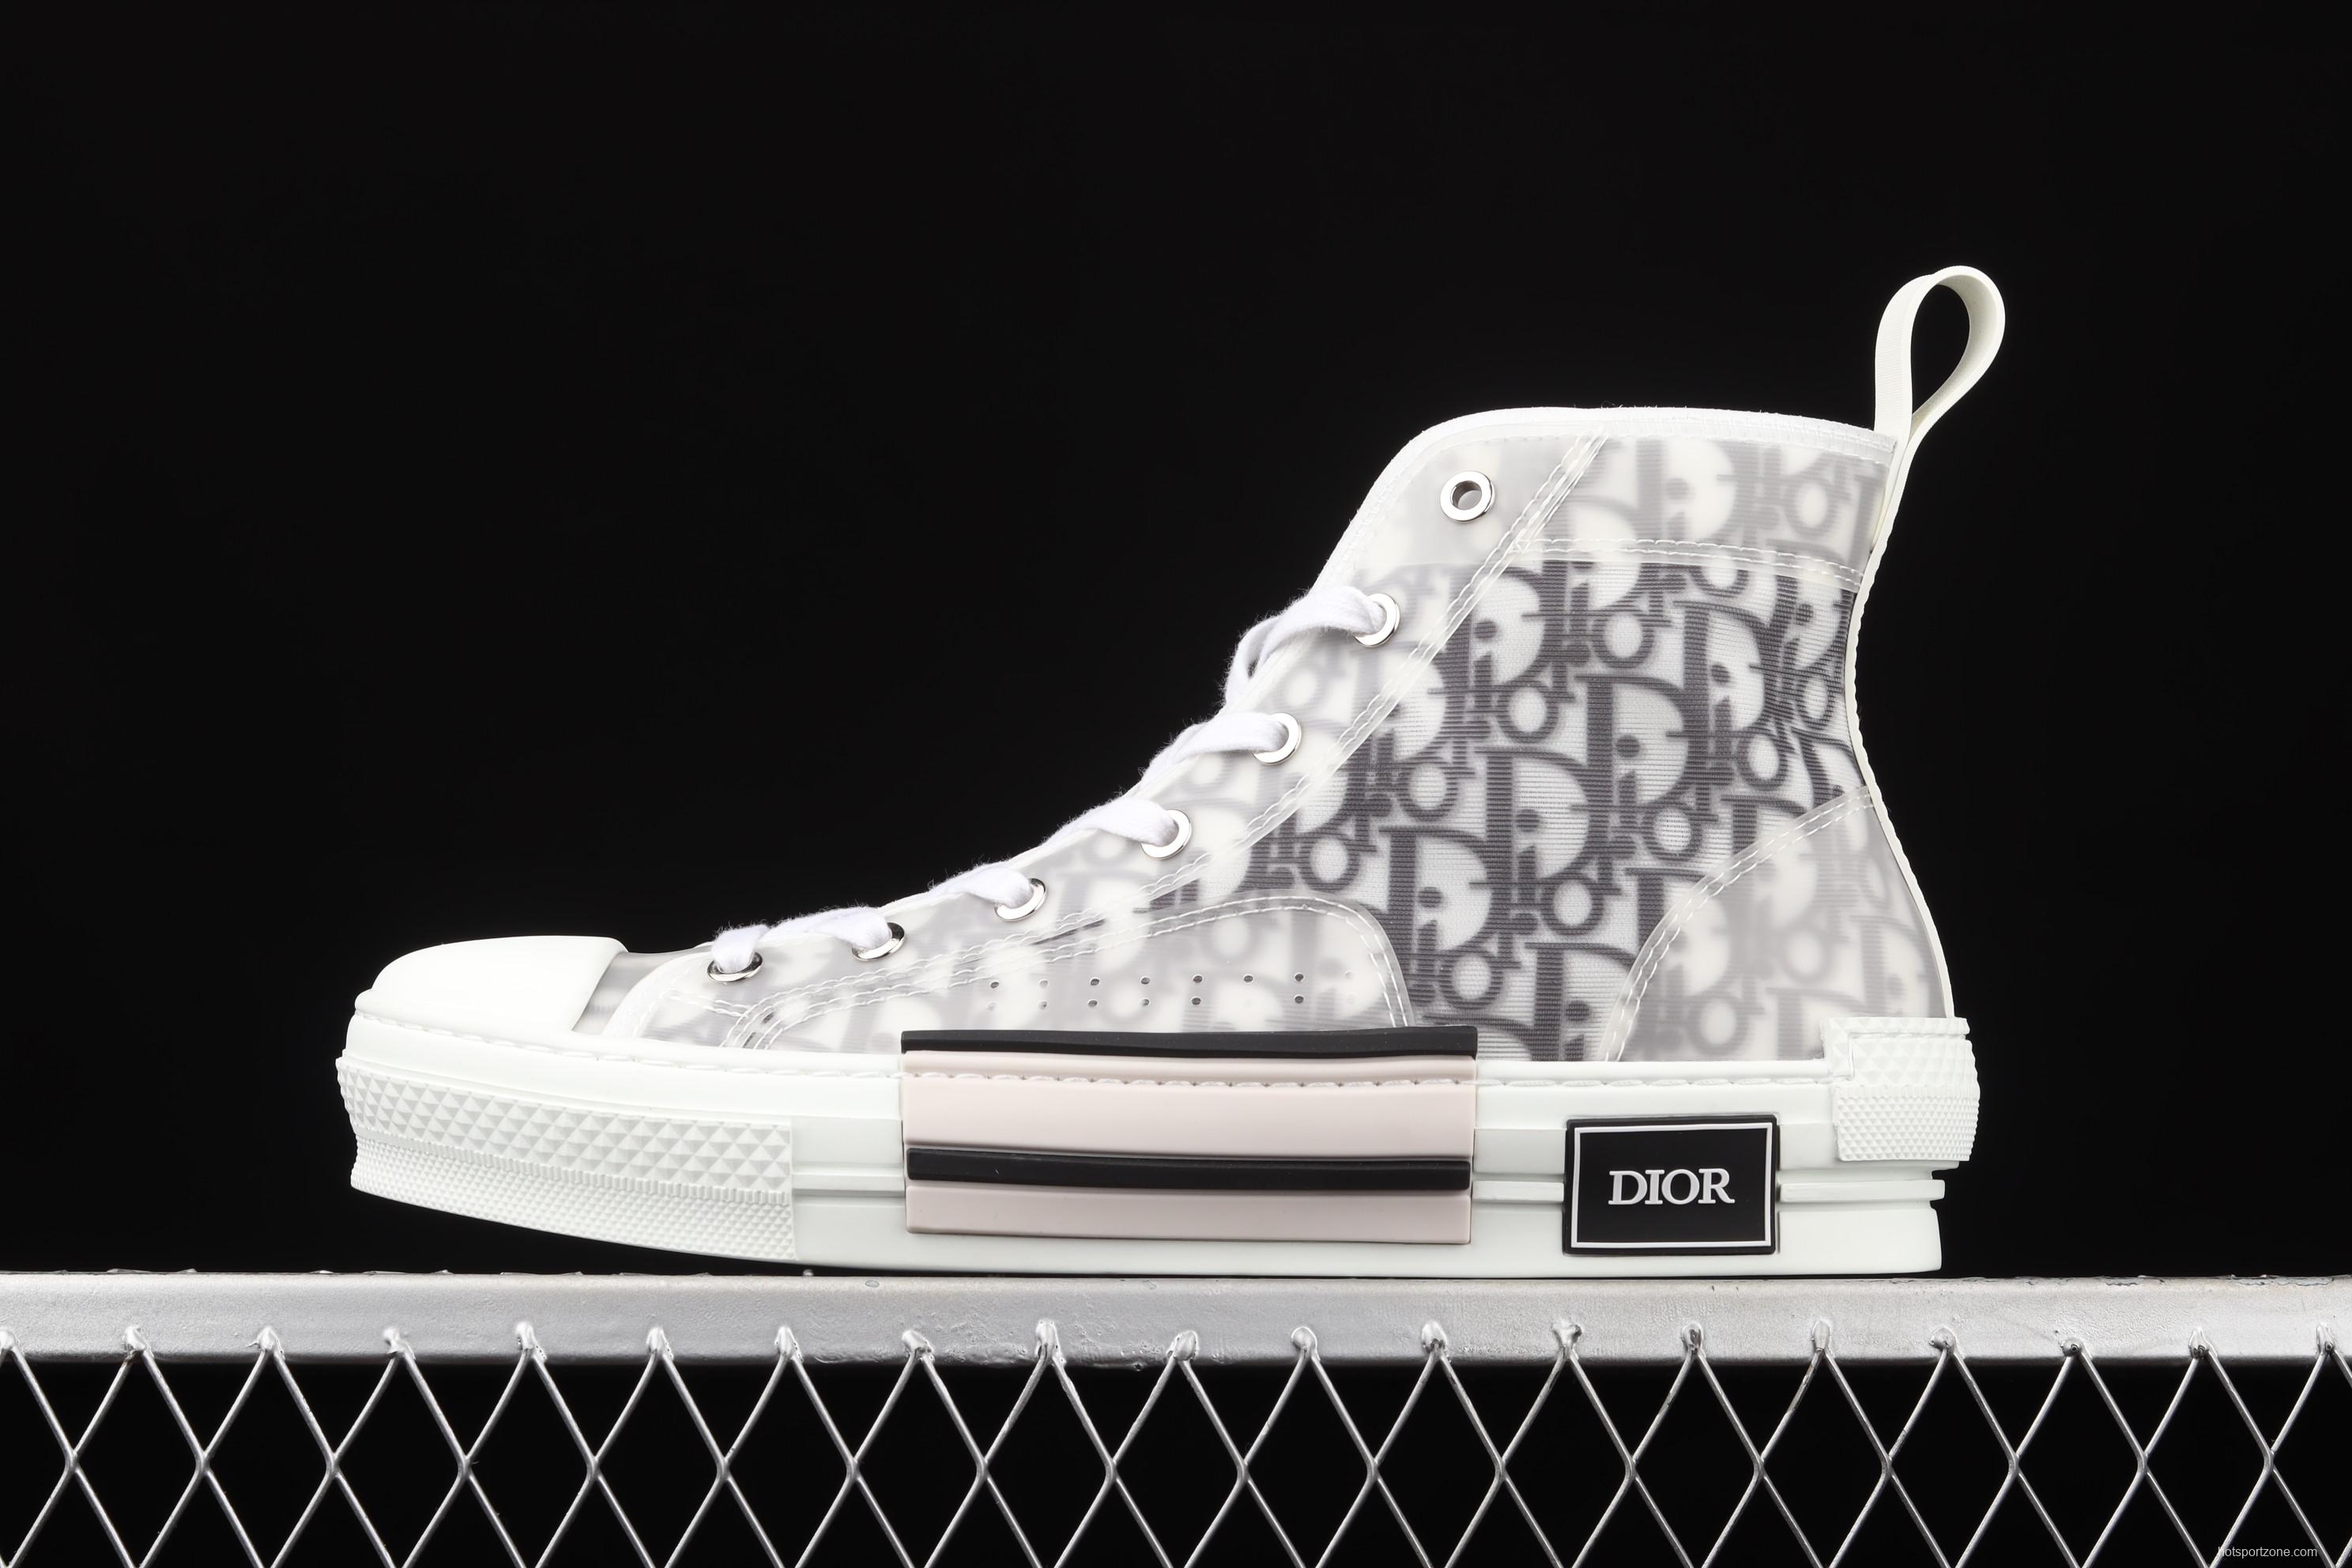 Authentic Dior B23 Oblique High Top Sneakers Dior CD ghosting high upper board shoes 3SH118YJR 063 White/Black